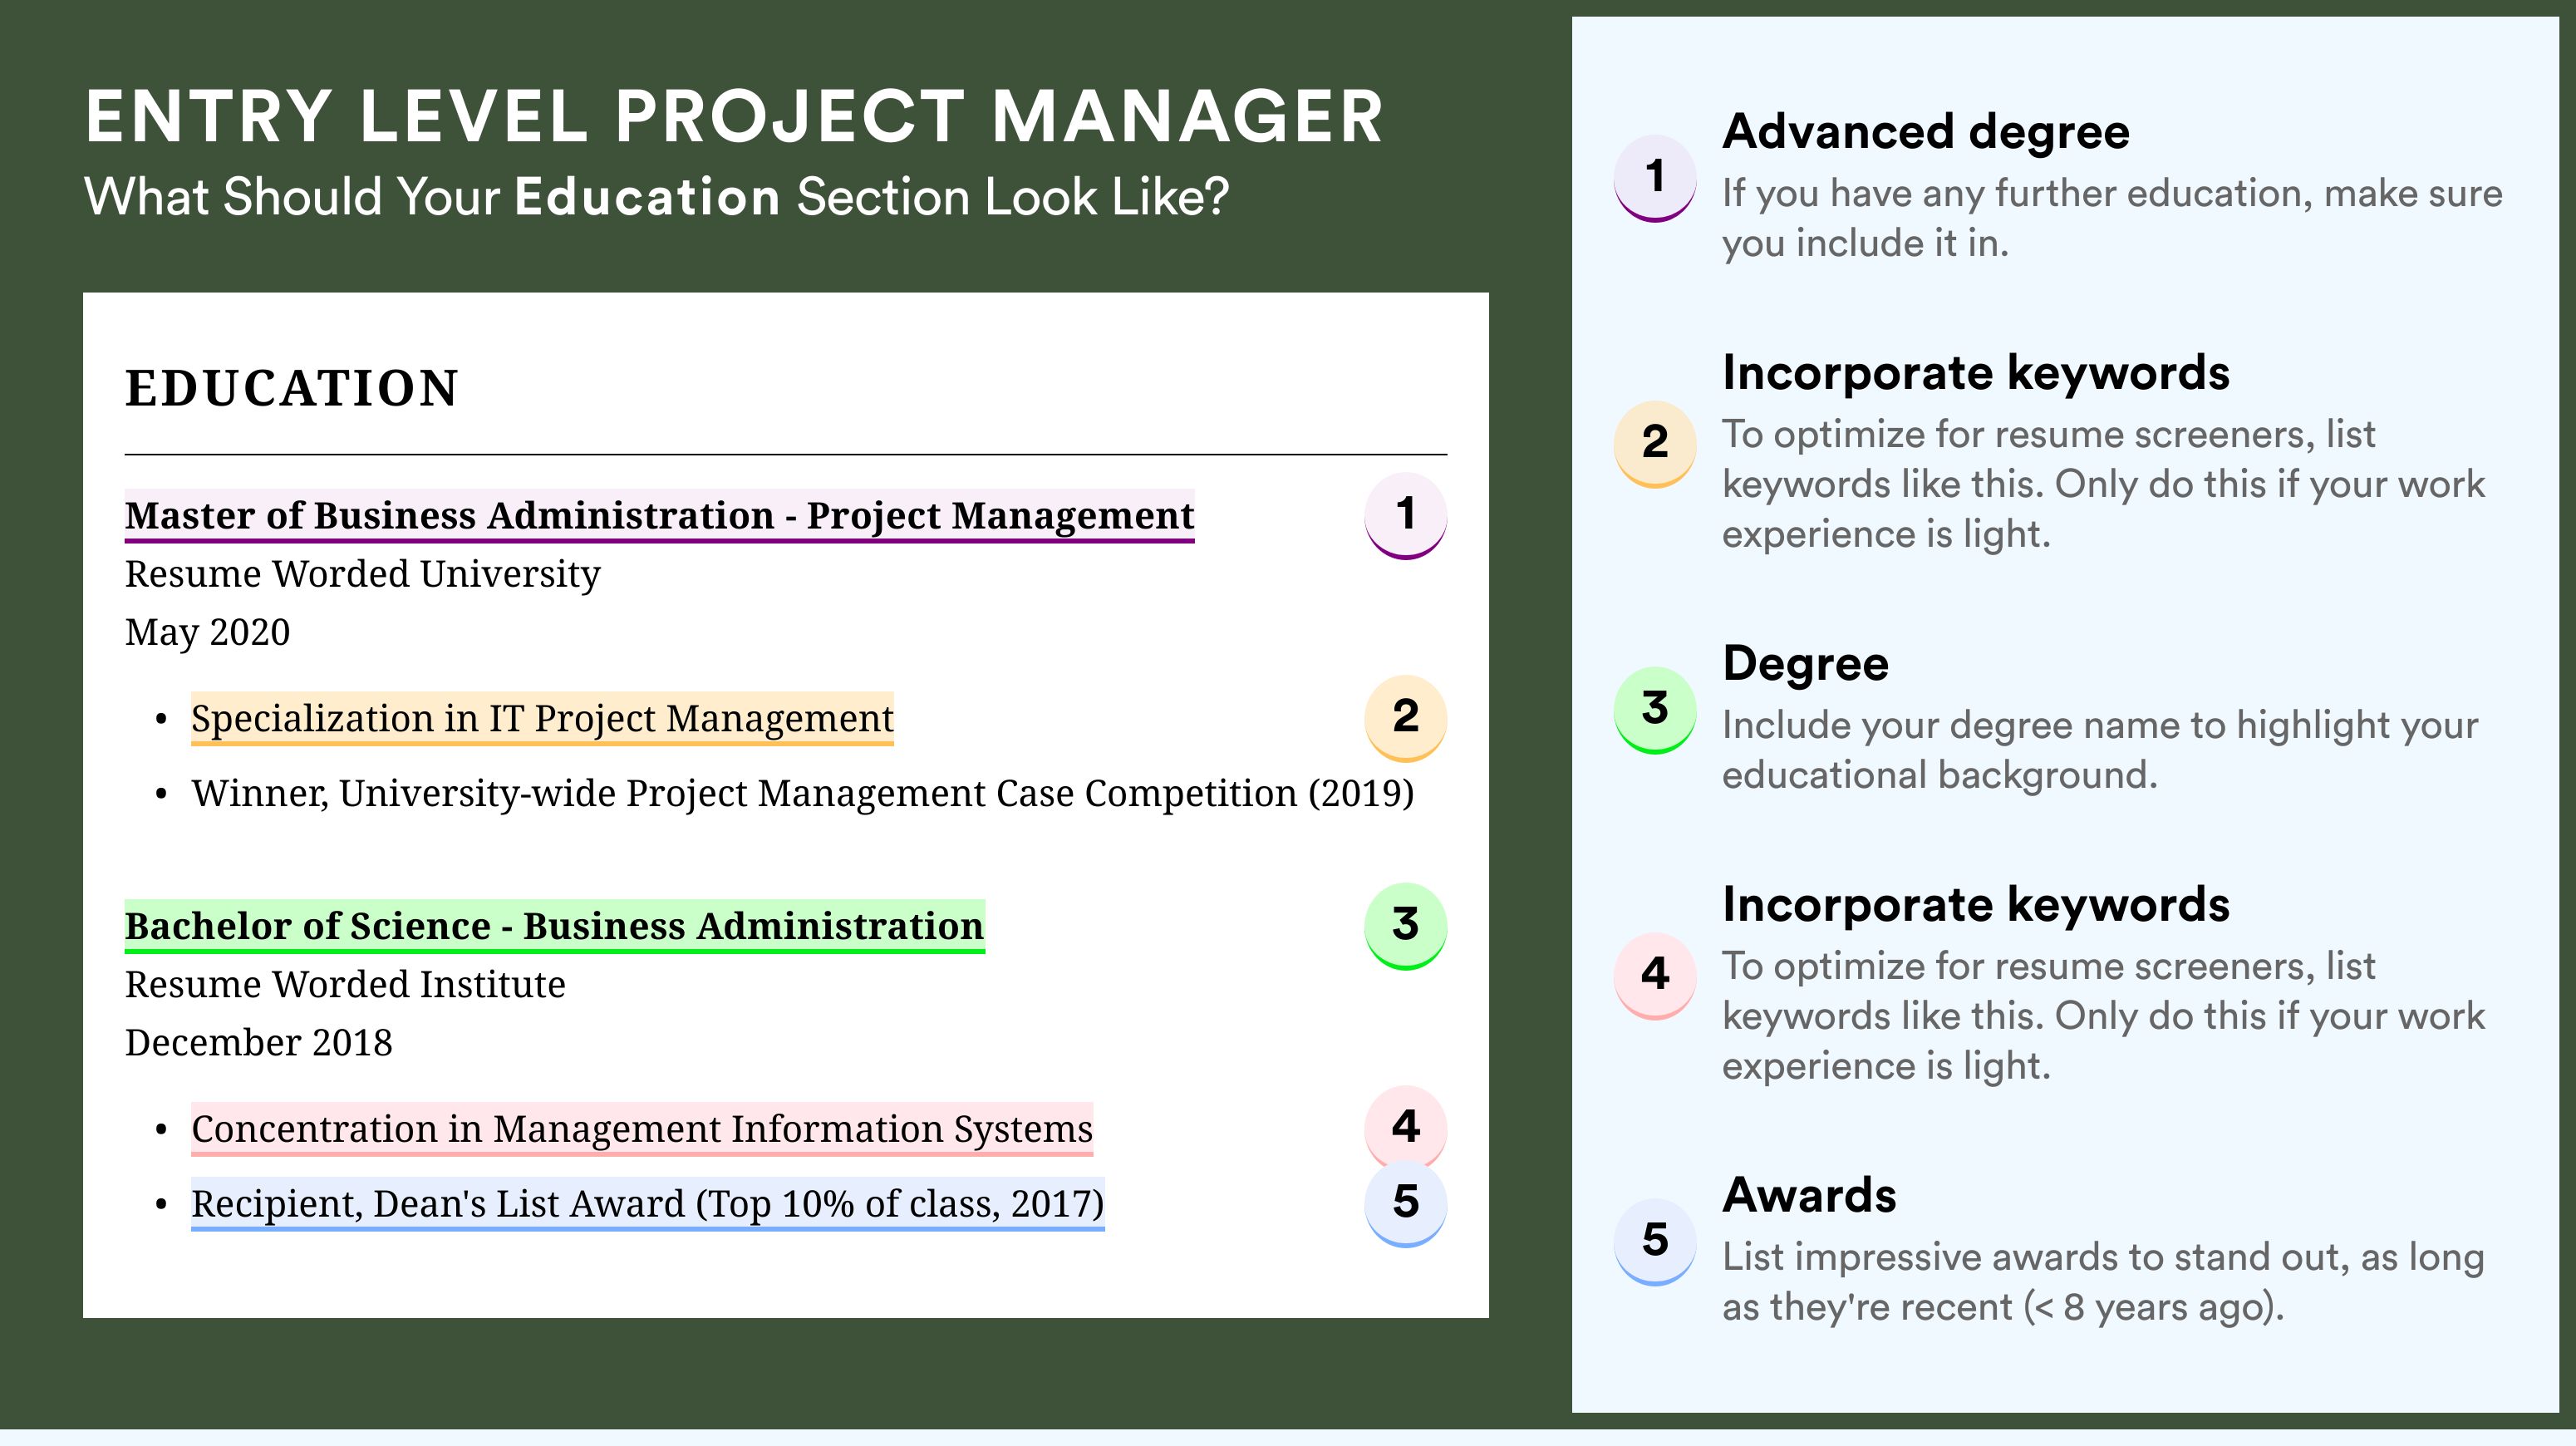 How To Write An Education Section - Entry Level Project Manager Roles